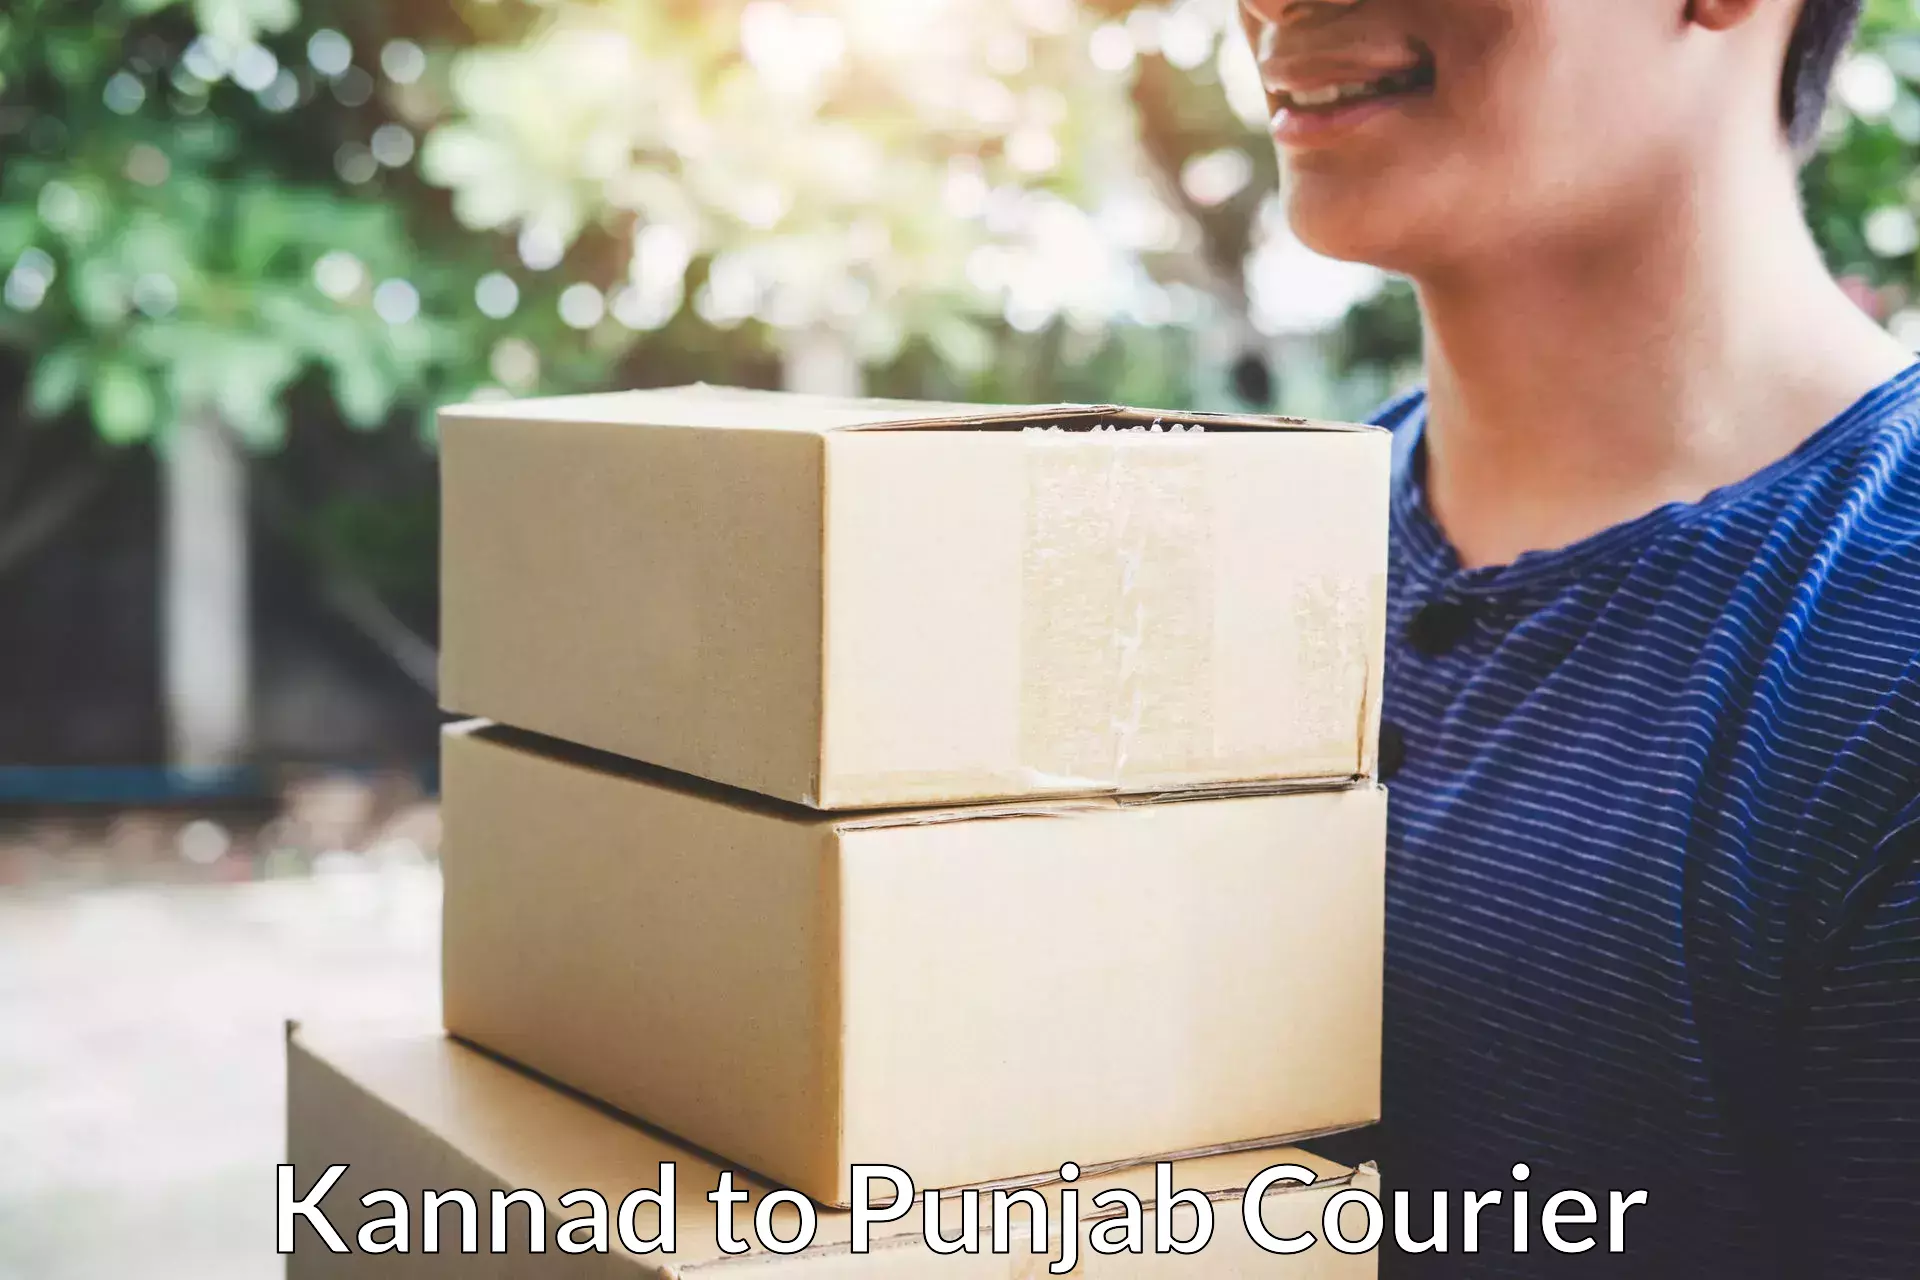 Home goods moving company Kannad to Punjab